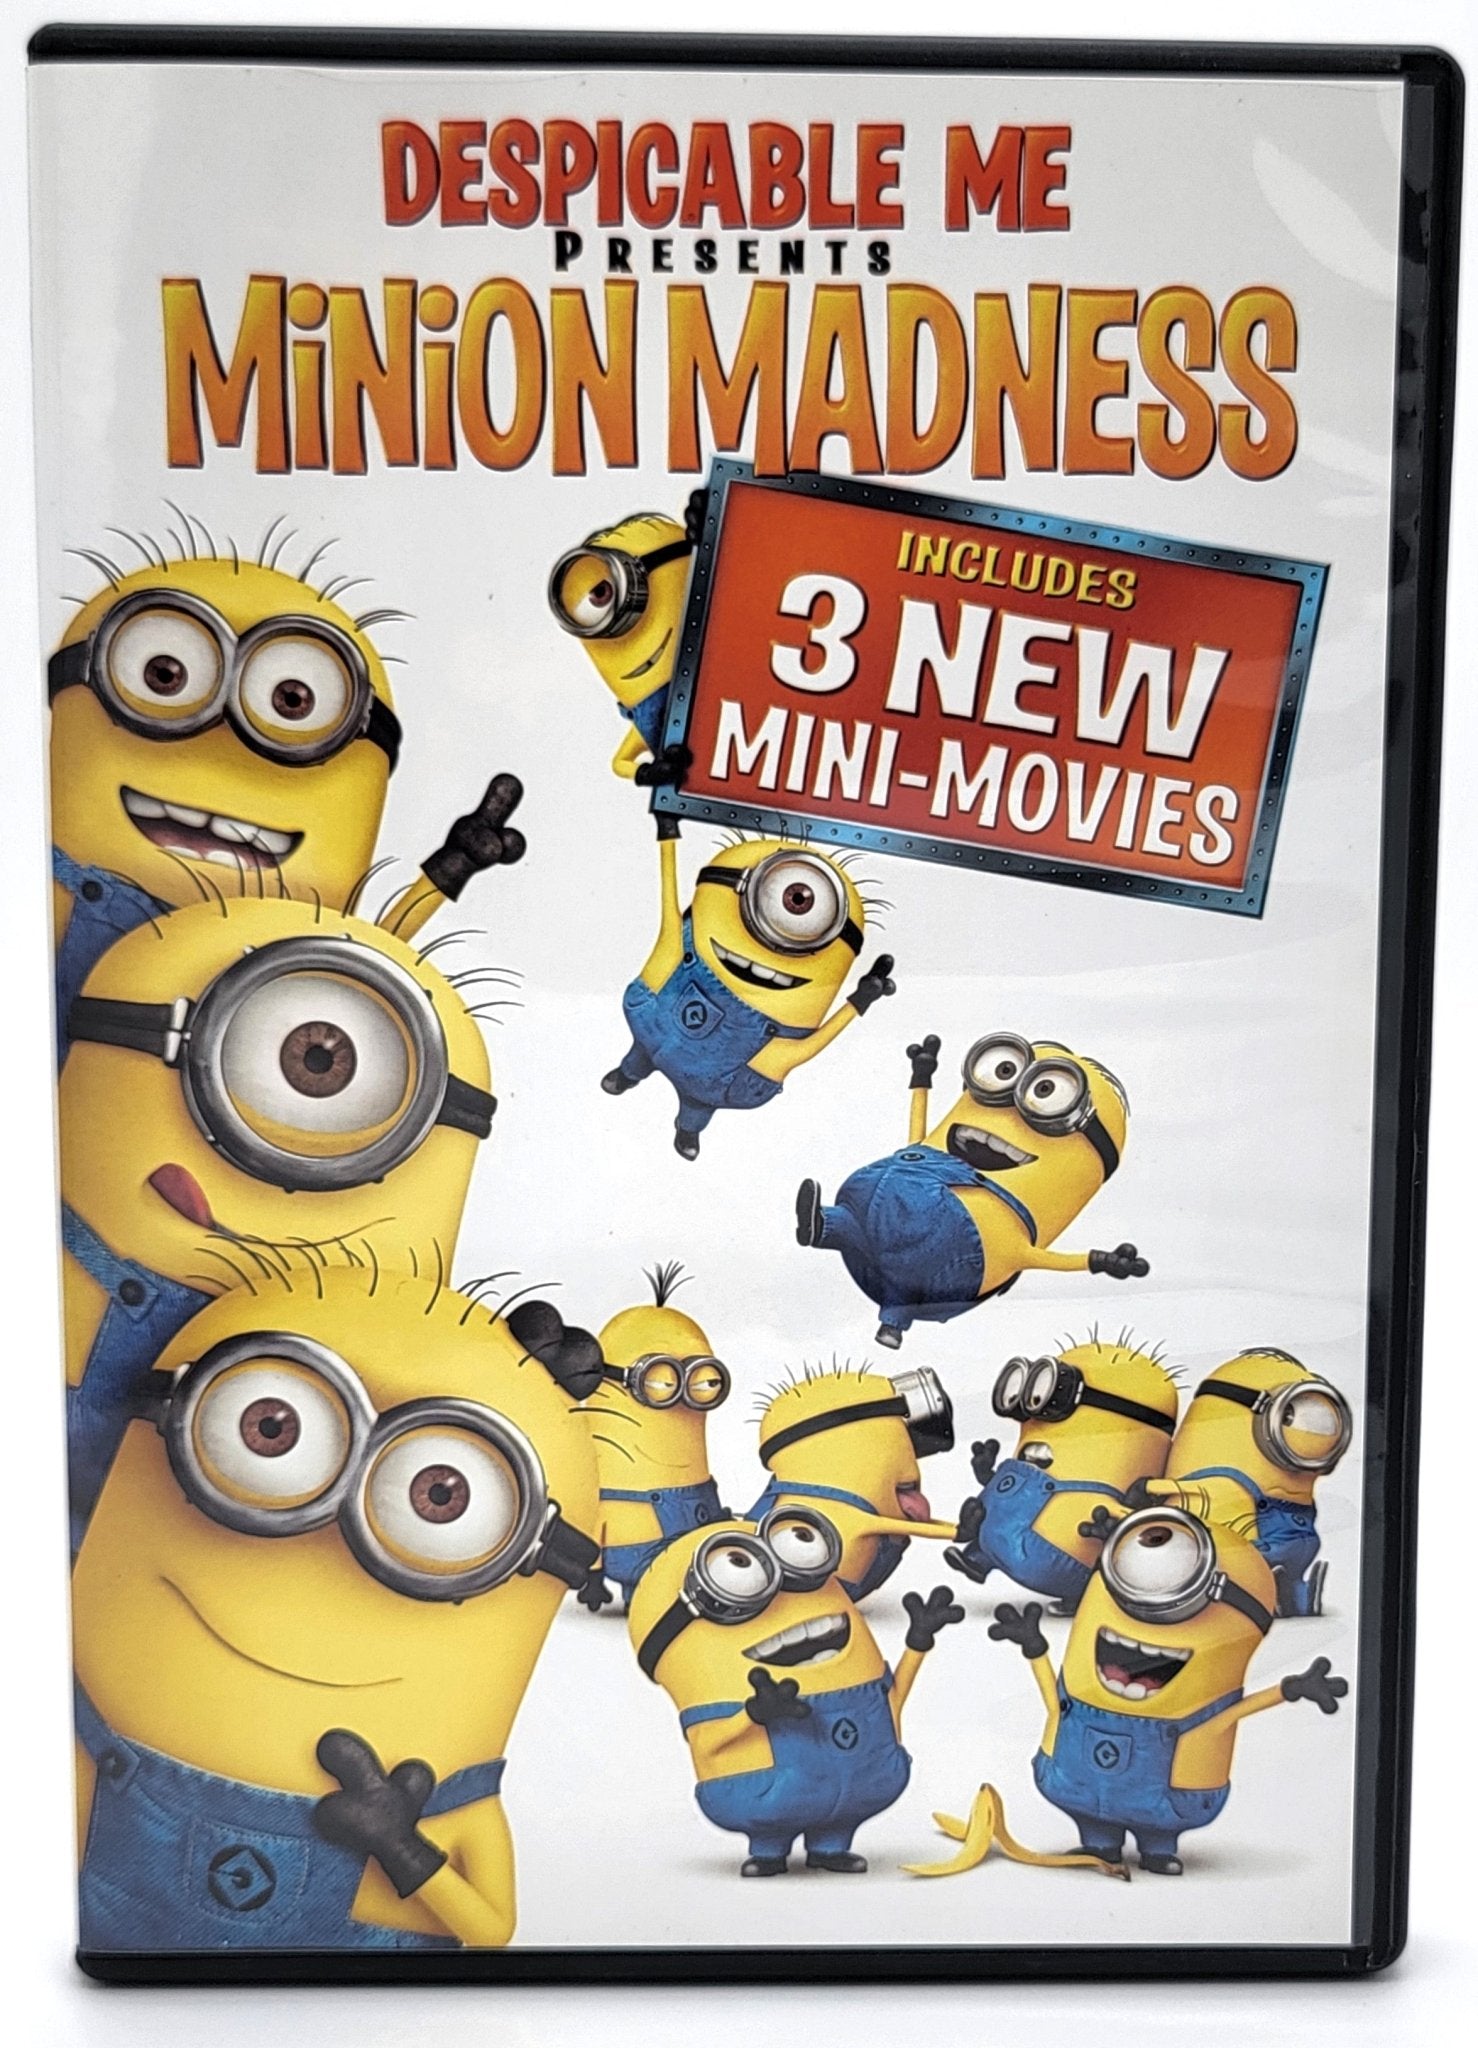 Universal Studios Home Entertainment - Despicable Me Presents Minion Madness | DVD | 3 New Mini Movies - DVD - Steady Bunny Shop